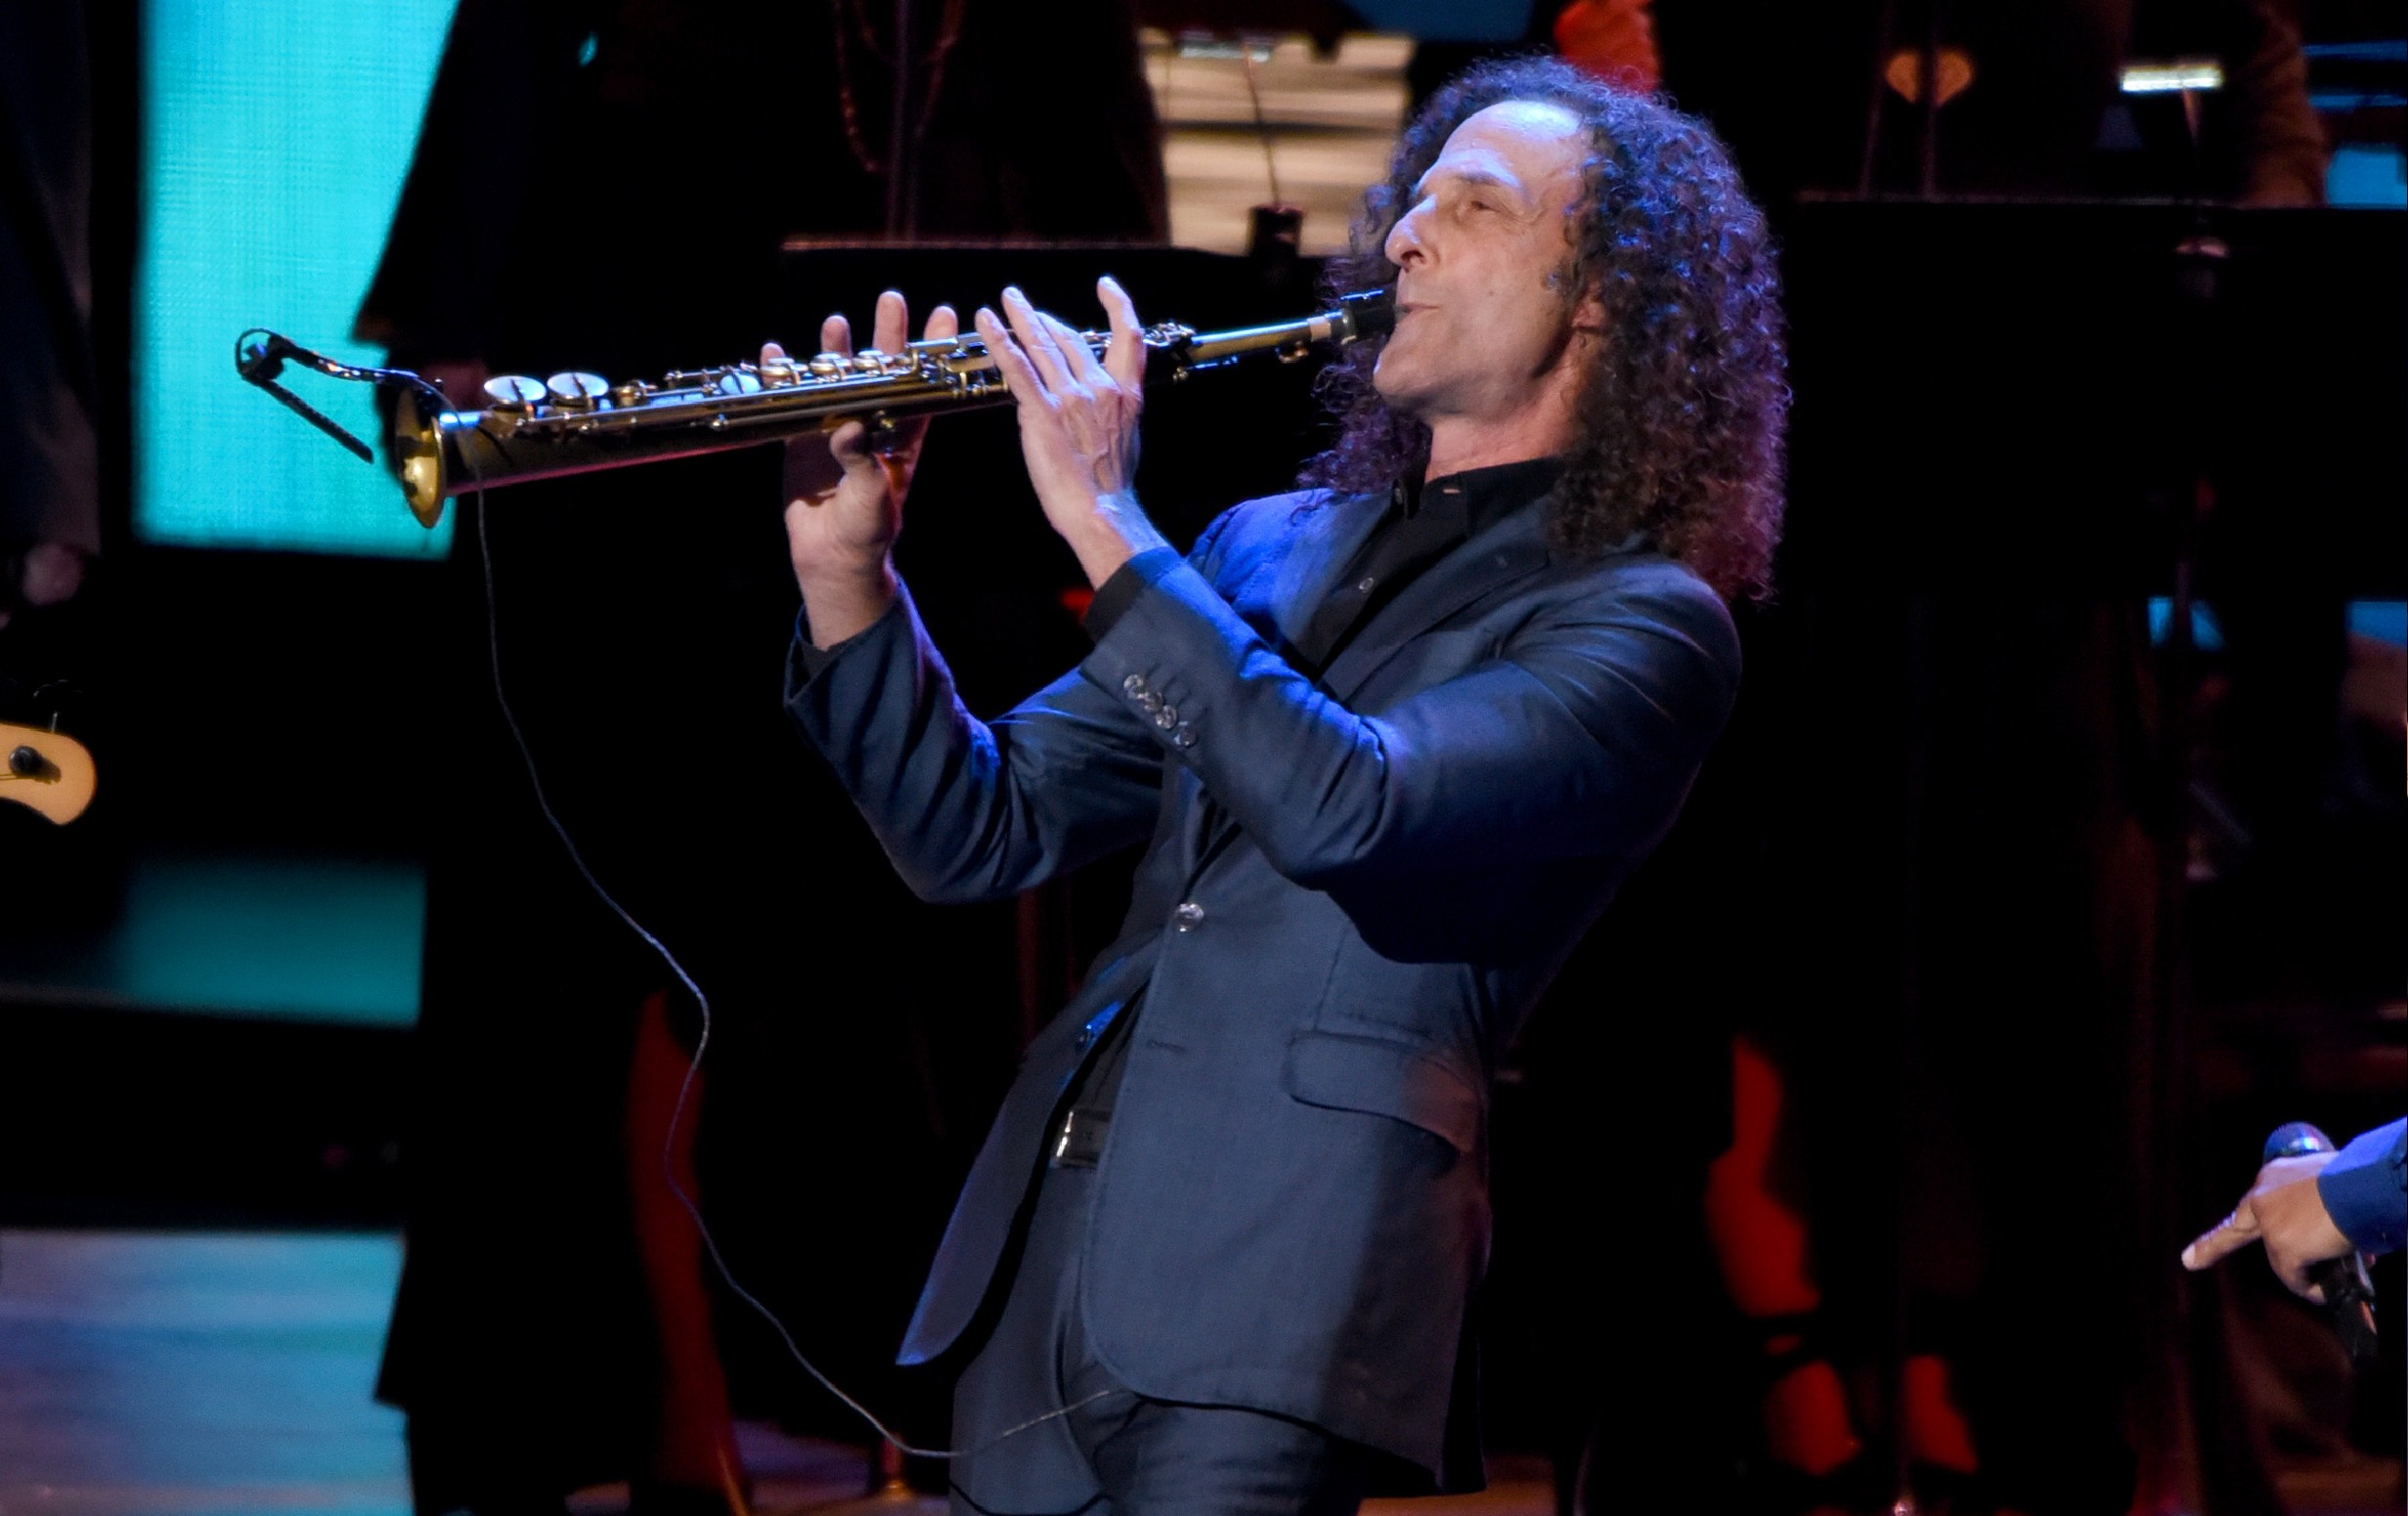 Kenny G wears a dark suit as he plays the saxophone onstage